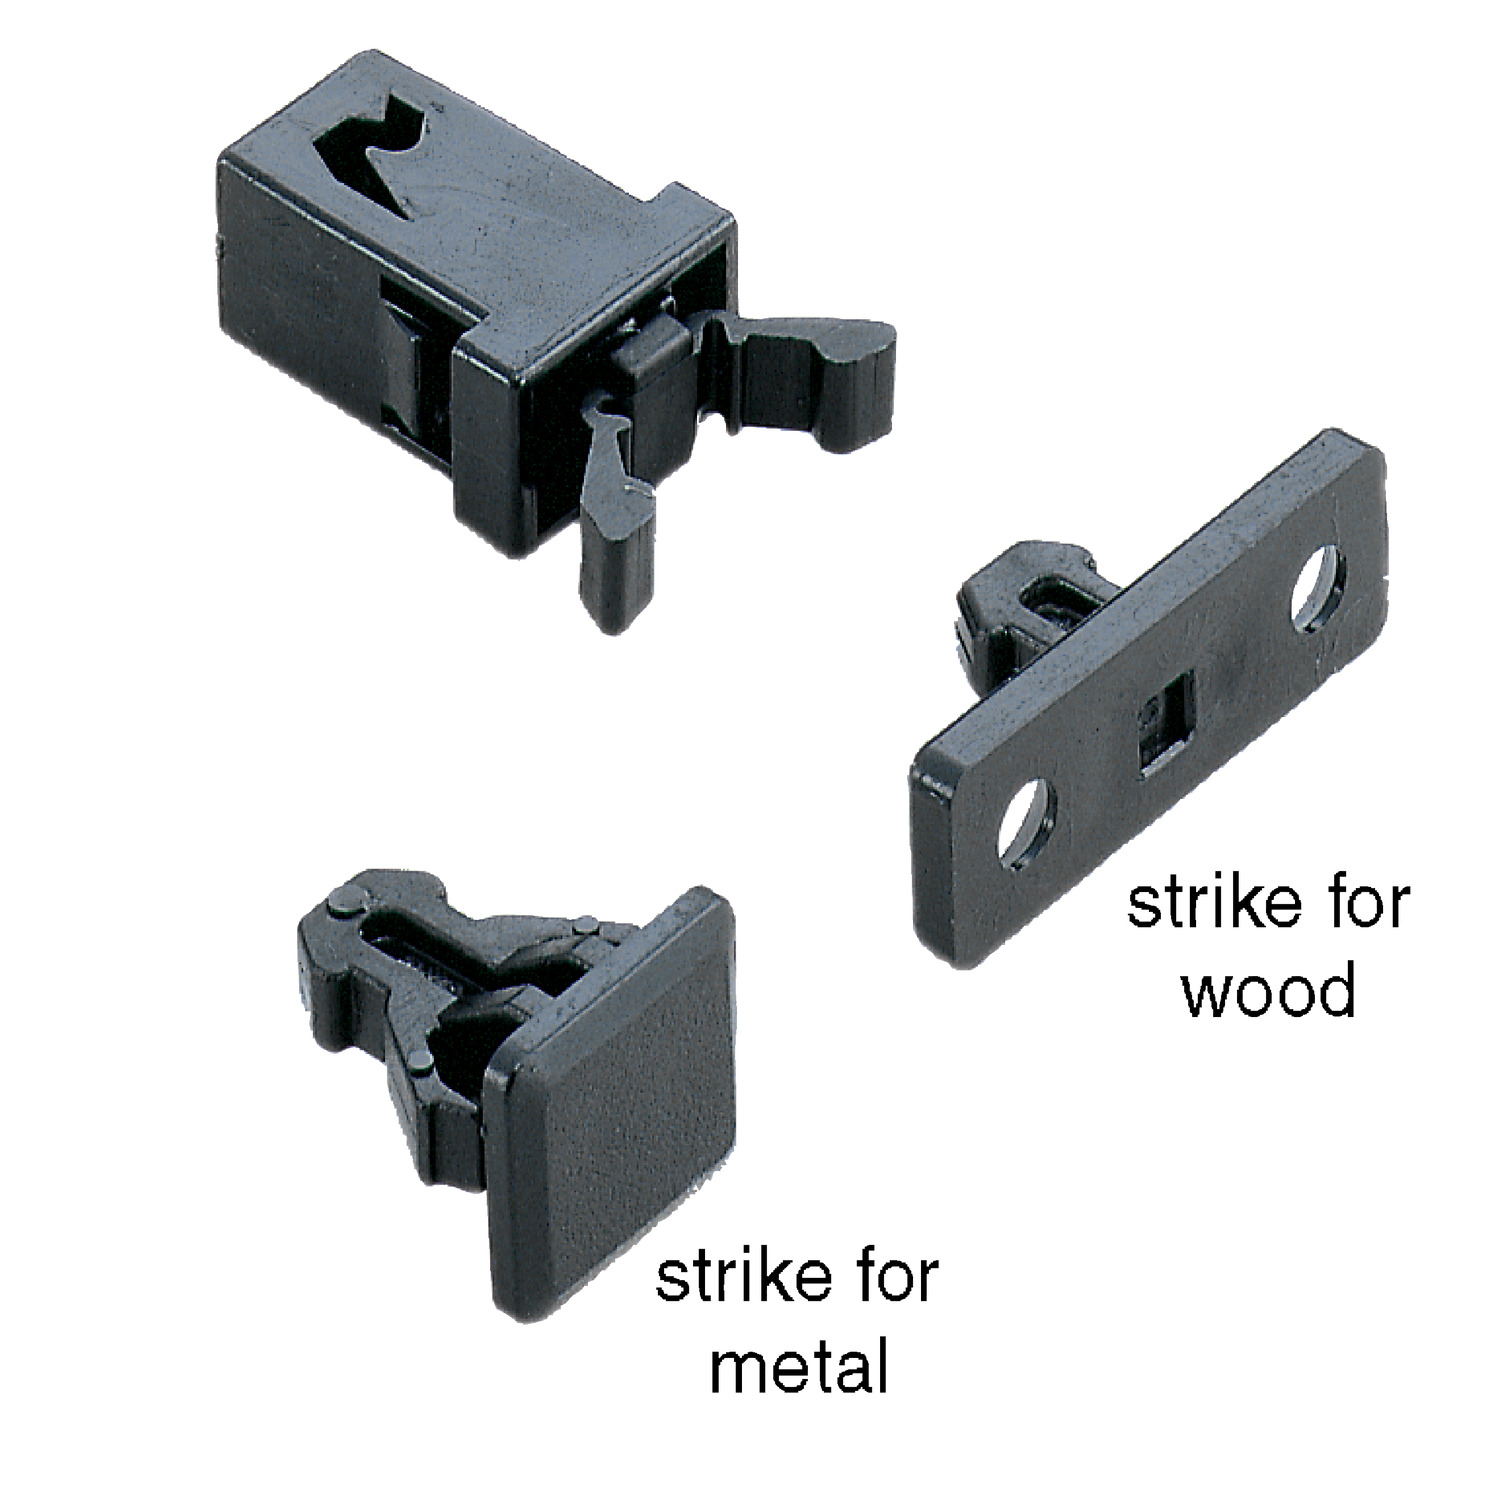 Mini Touch Latches Popular mini touch latch, for installation in wood or metal. Supplied with strike, 1.2Kgf retaining force.